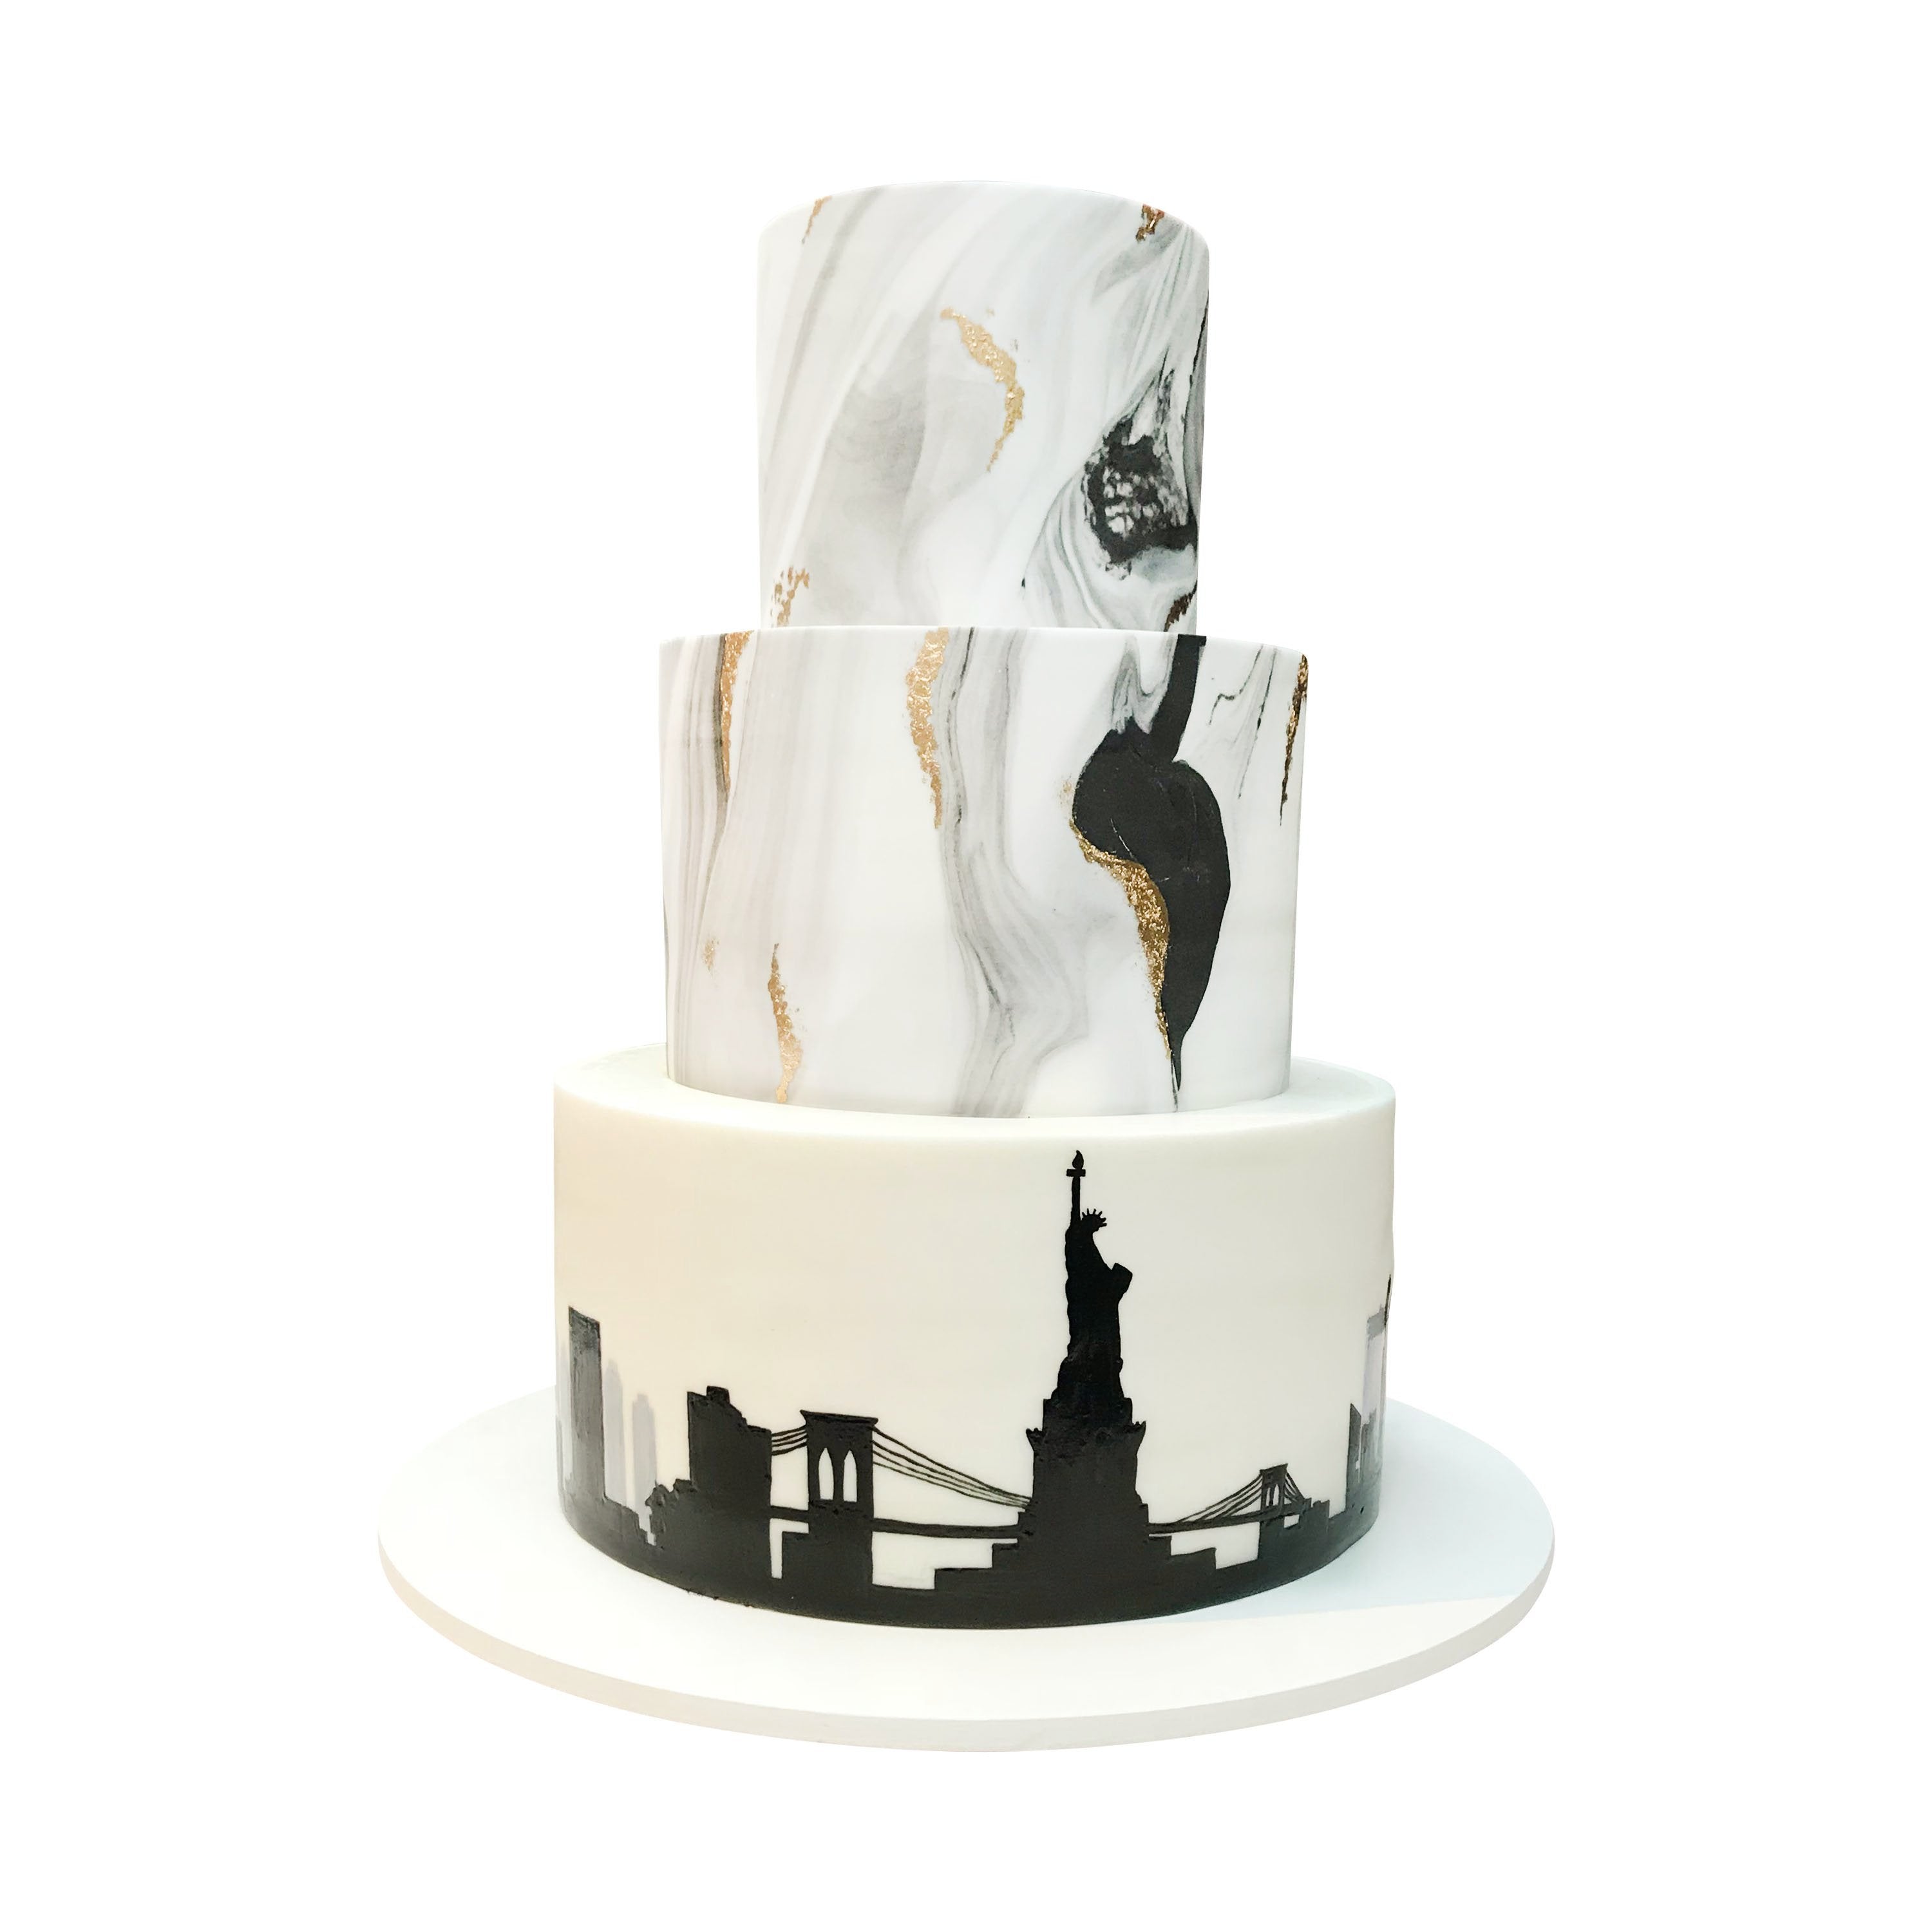 Wedding Cake Bakeries in New York, NY - The Knot